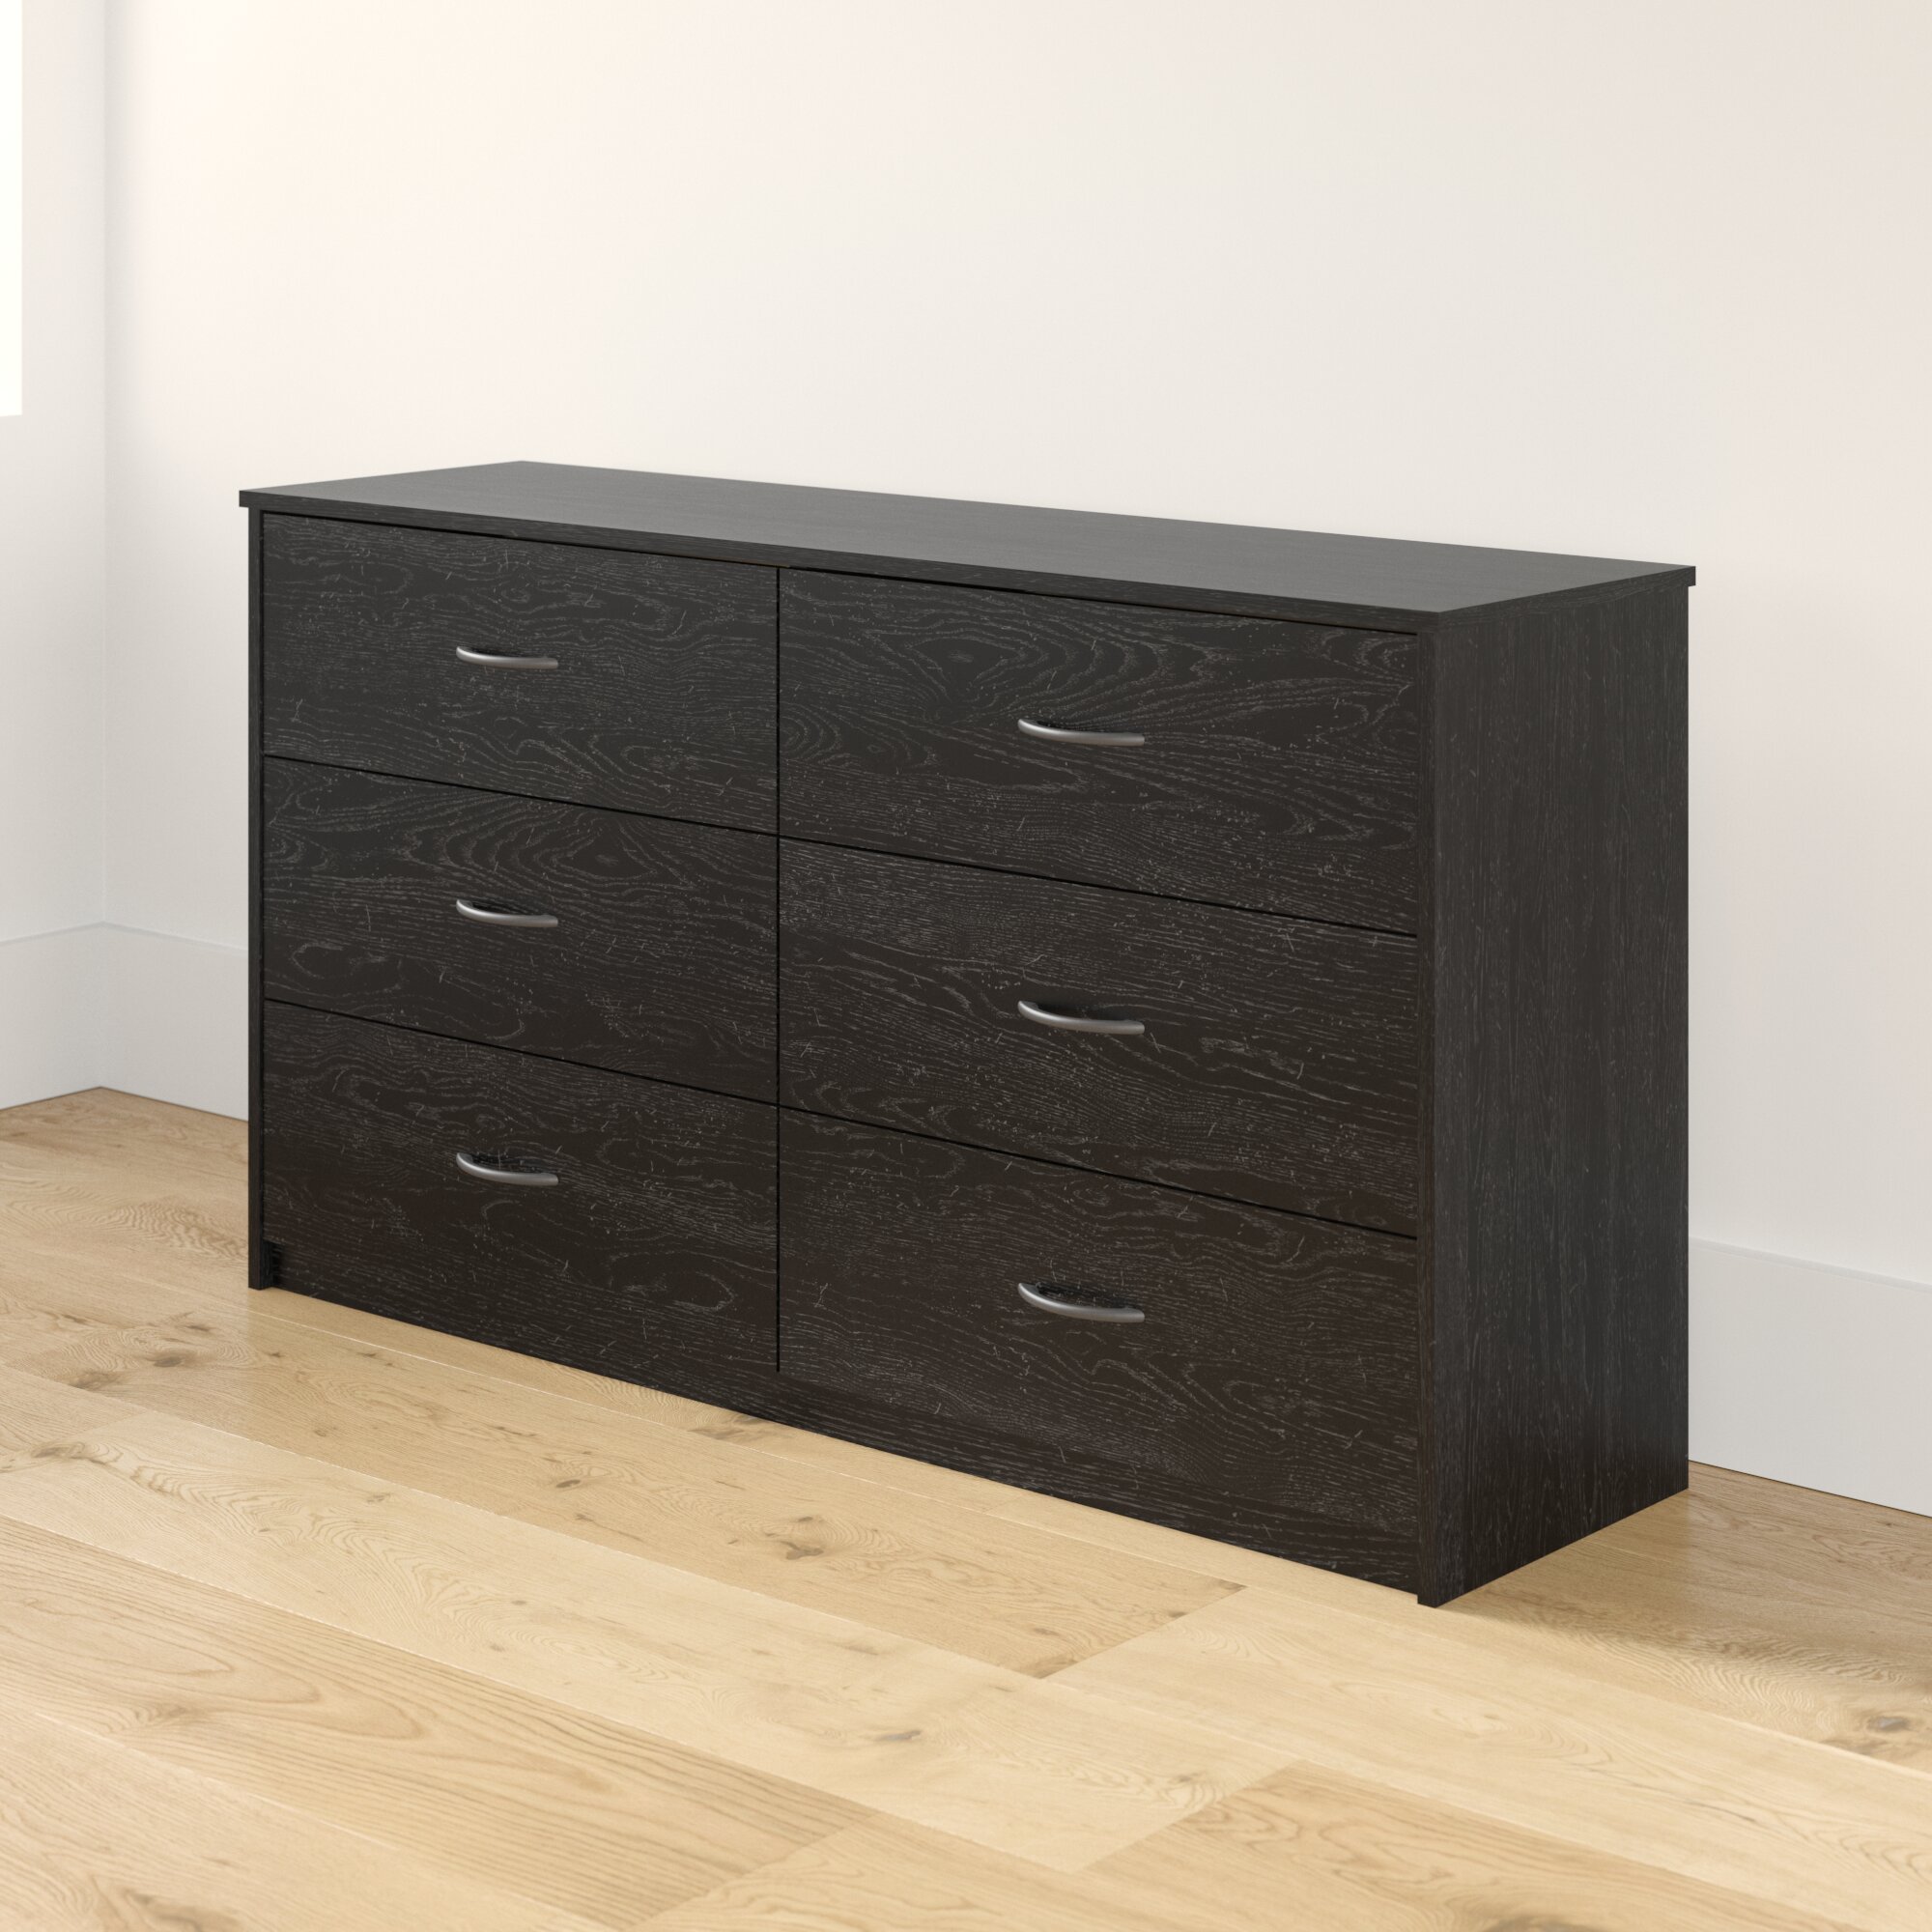 Black Dressers Chest Of Drawers Up To 80 Off This Week Only